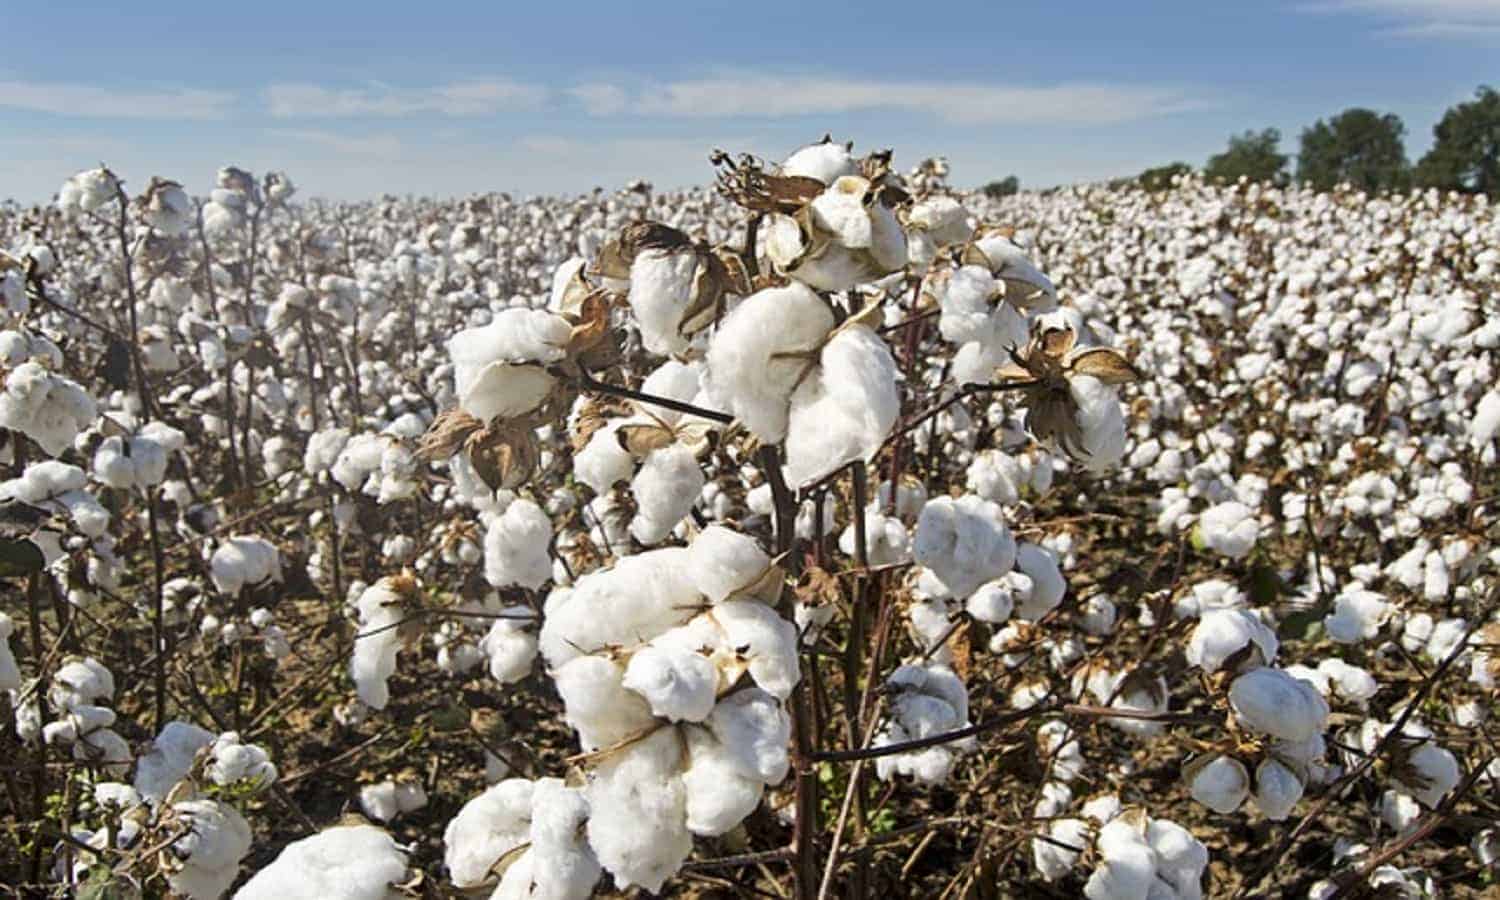 Arab Cotton Ginning to pay EGP 0.25/share dividends in January